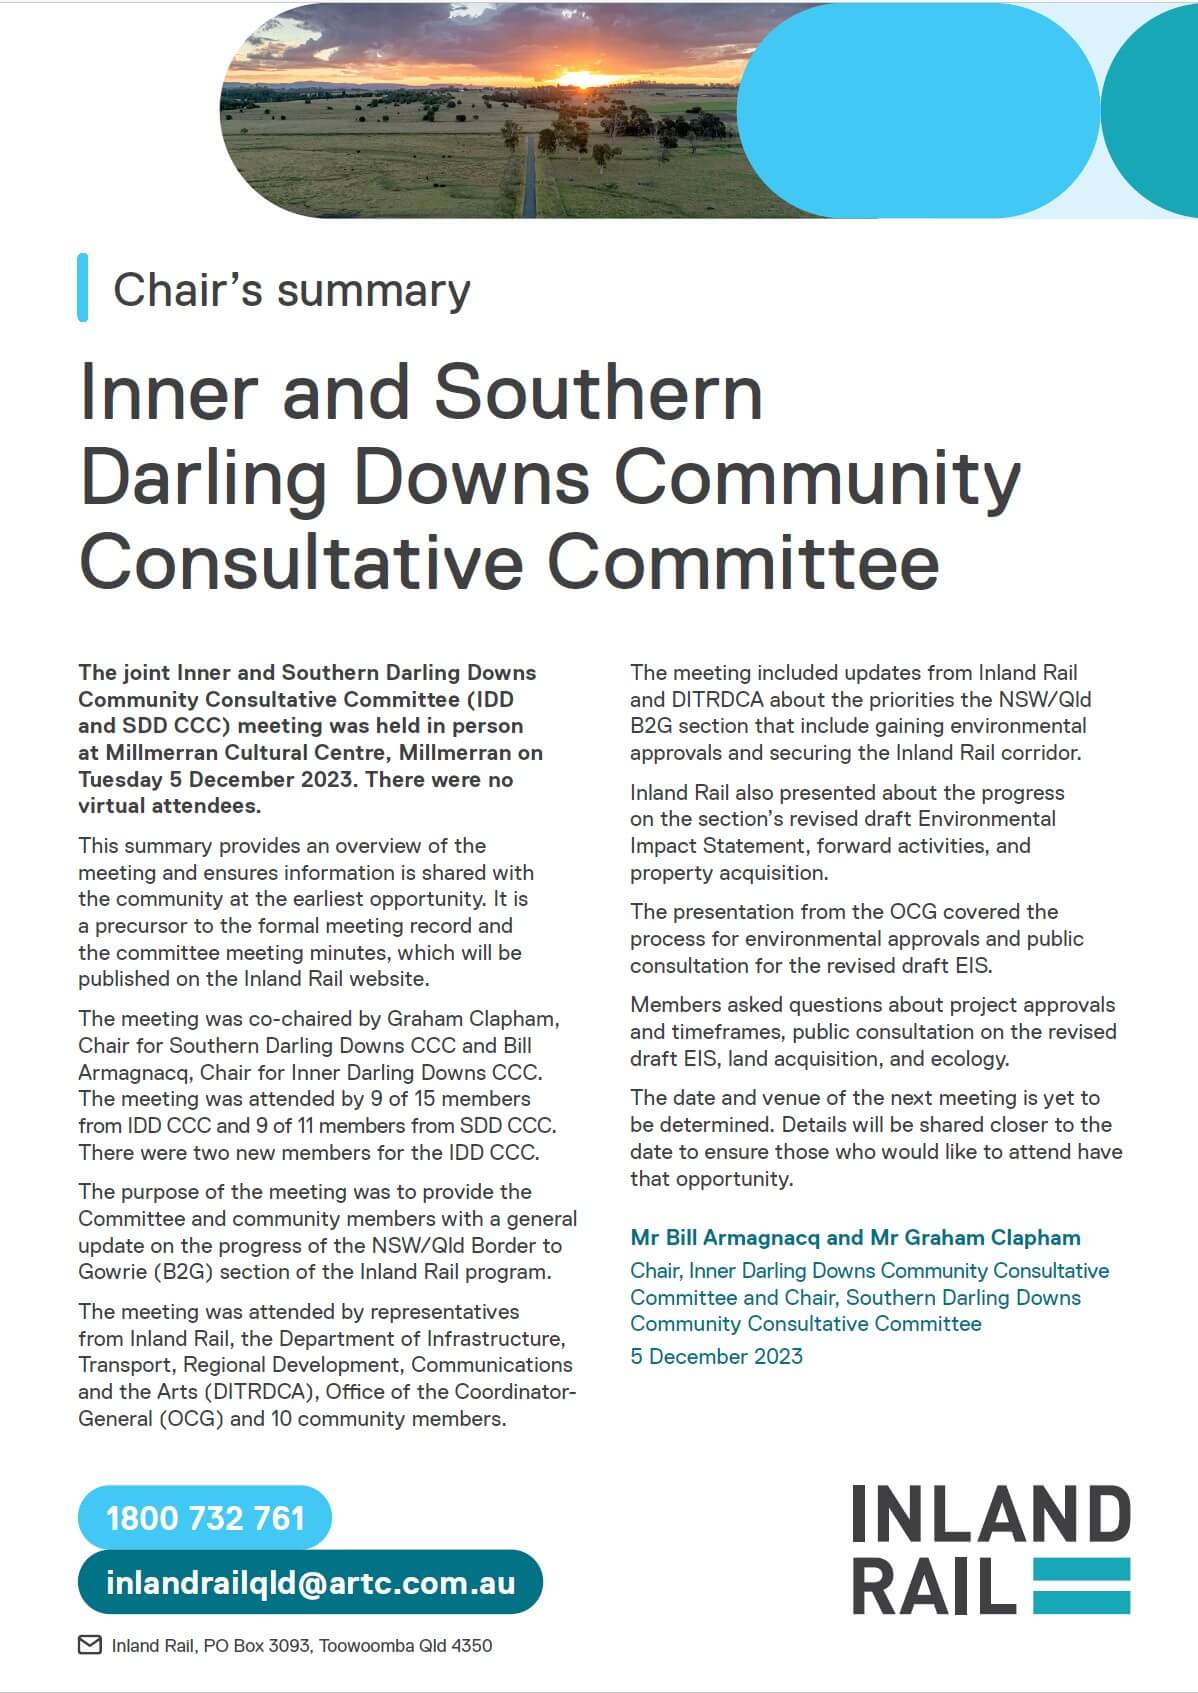 Preview image of Chair's summary for the Inner and Southern Darling Downs Community Consultative Committee meeting, 5 December 2023.